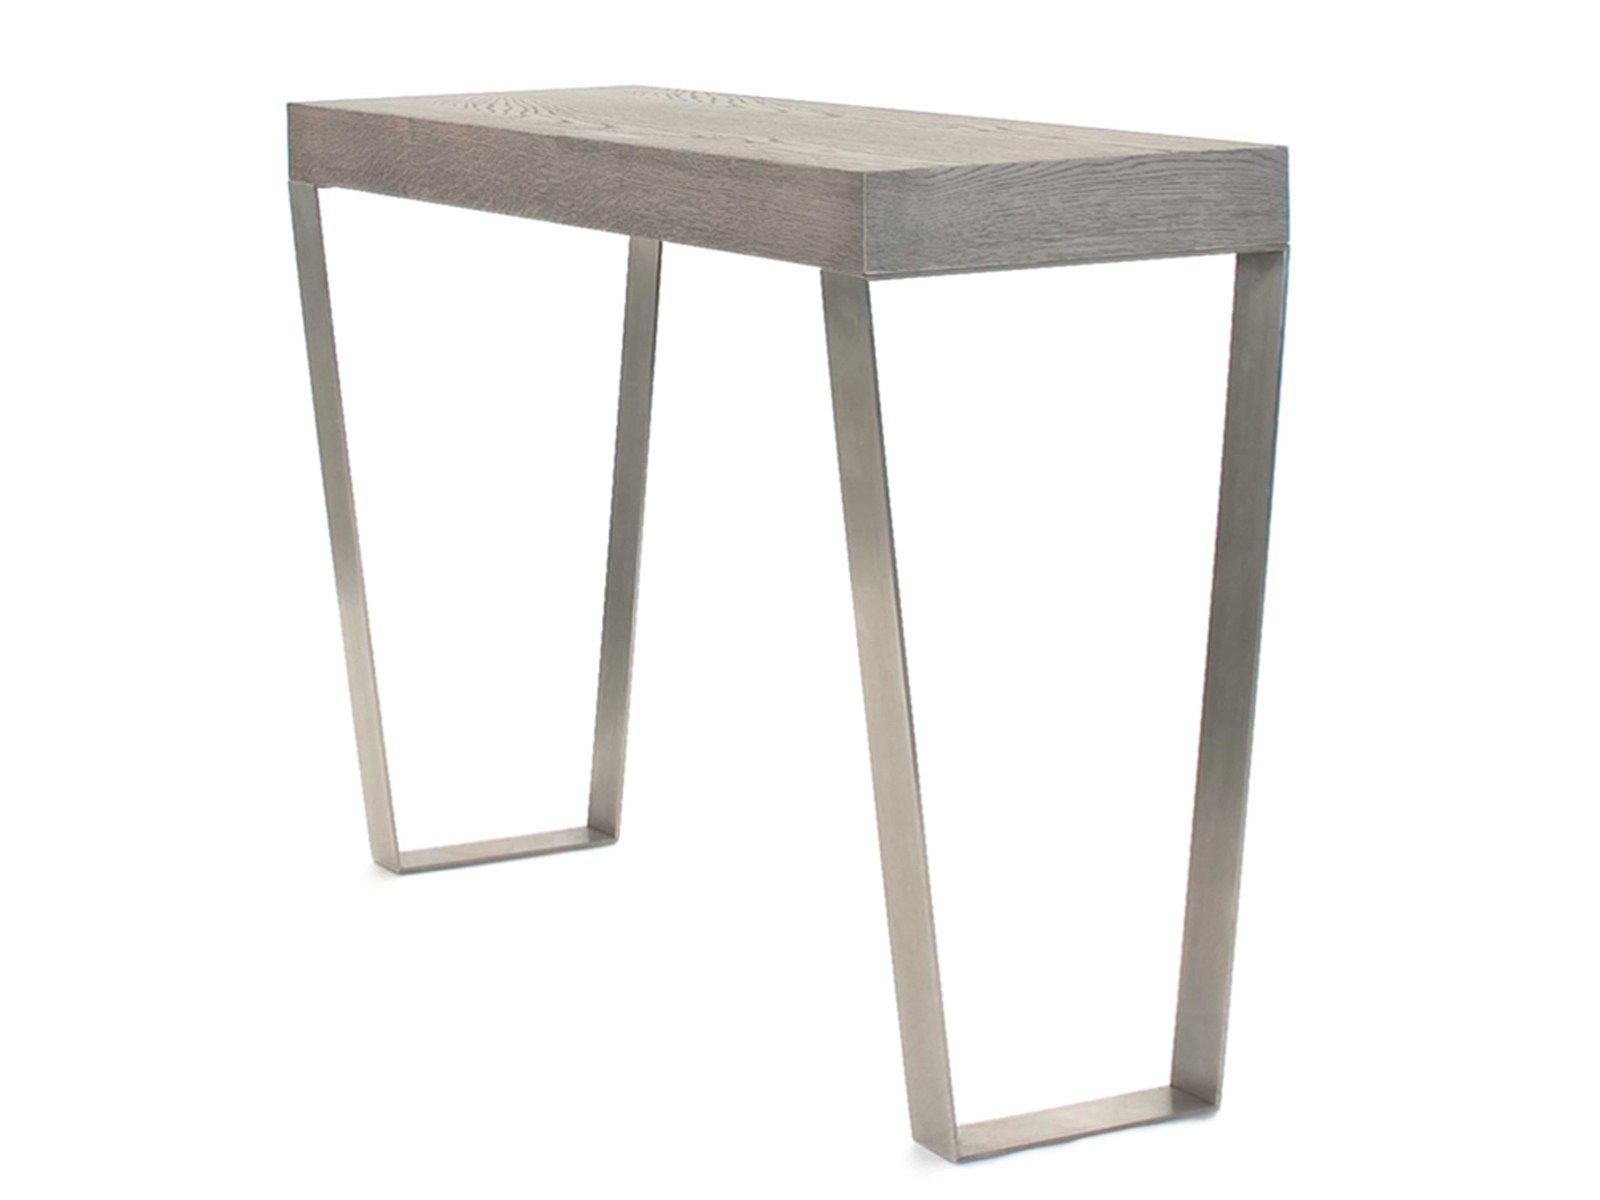 Preferred Wood Veneer Console Tables For Rectangular Wood Veneer Console Table Stellaazea (View 4 of 10)